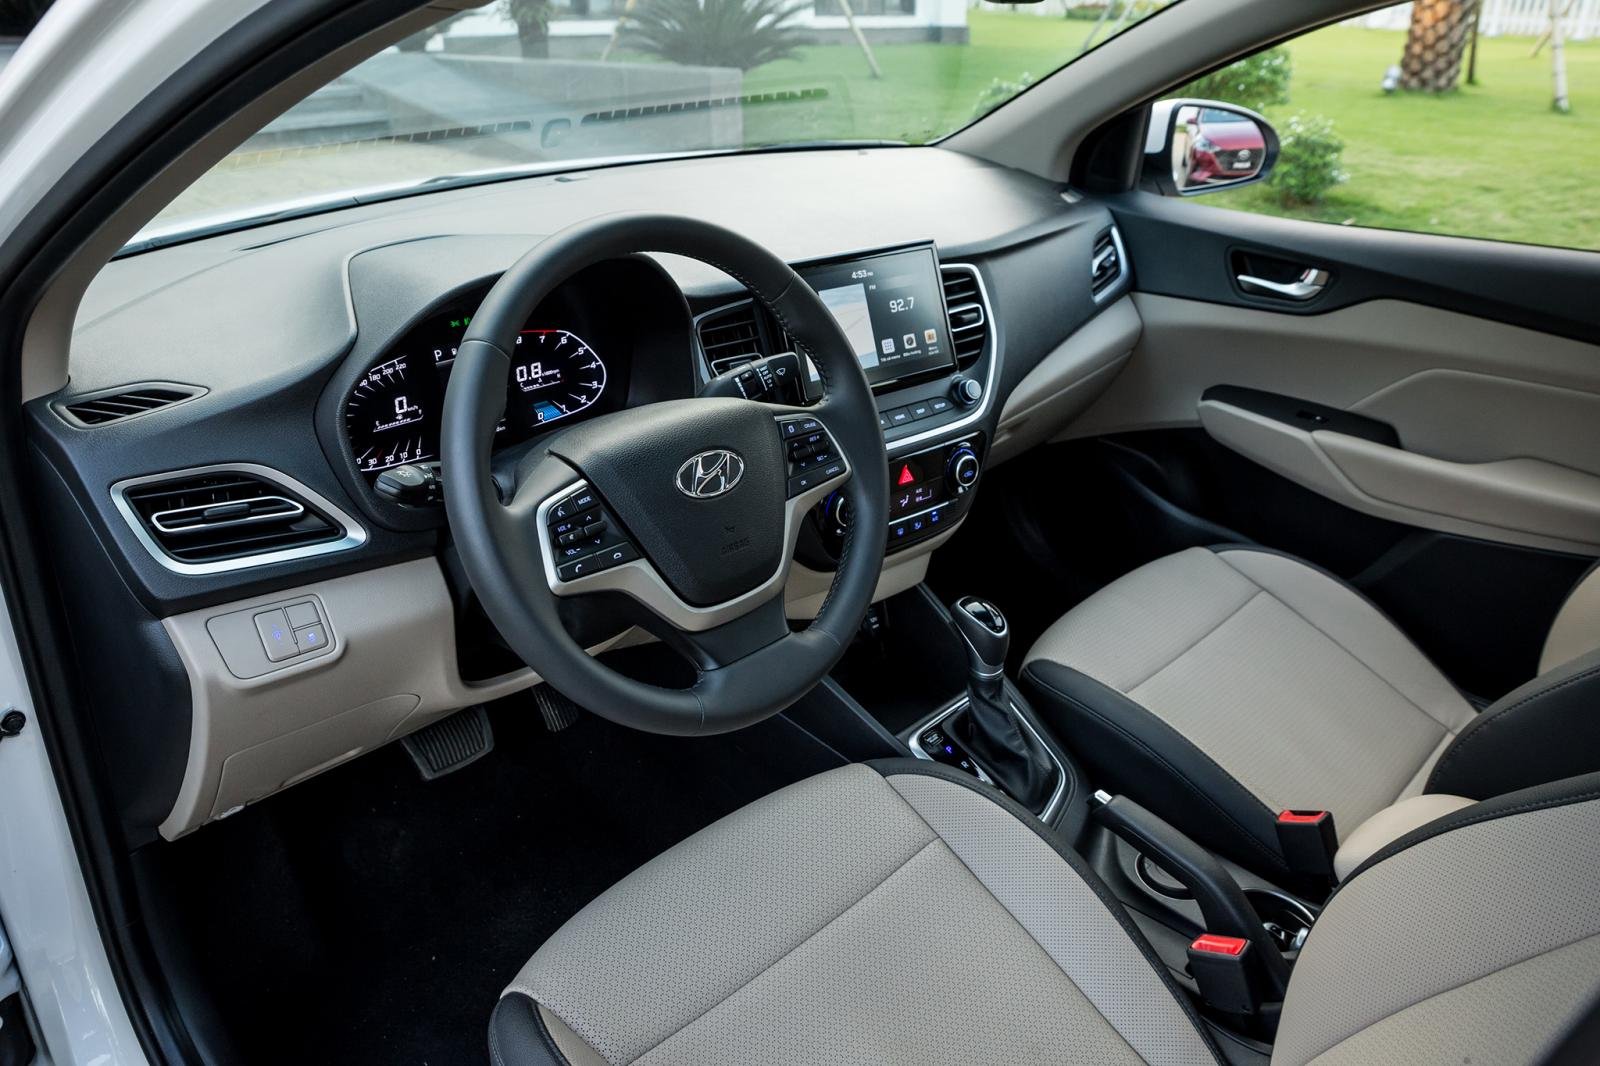 Accent 2022 interior has three leather options of beige, gray, and black with metal highlights